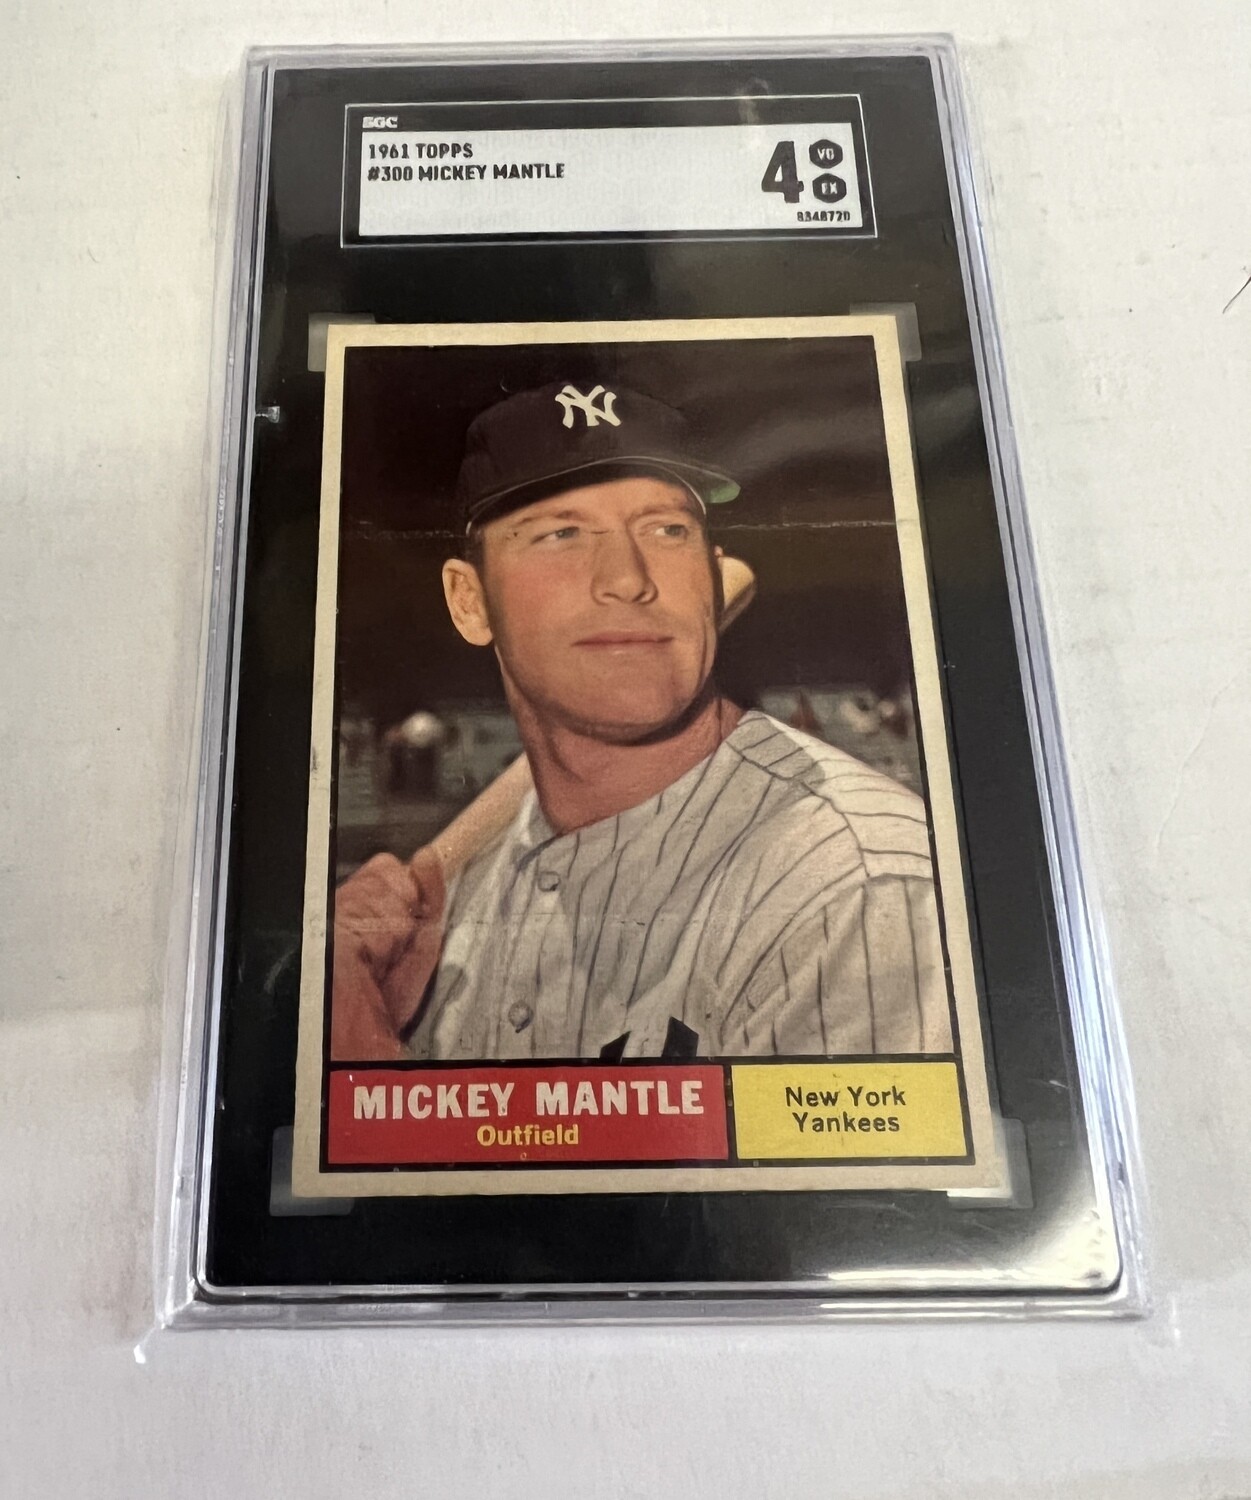 1961 Topps #300 Mickey Mantle SGC 4